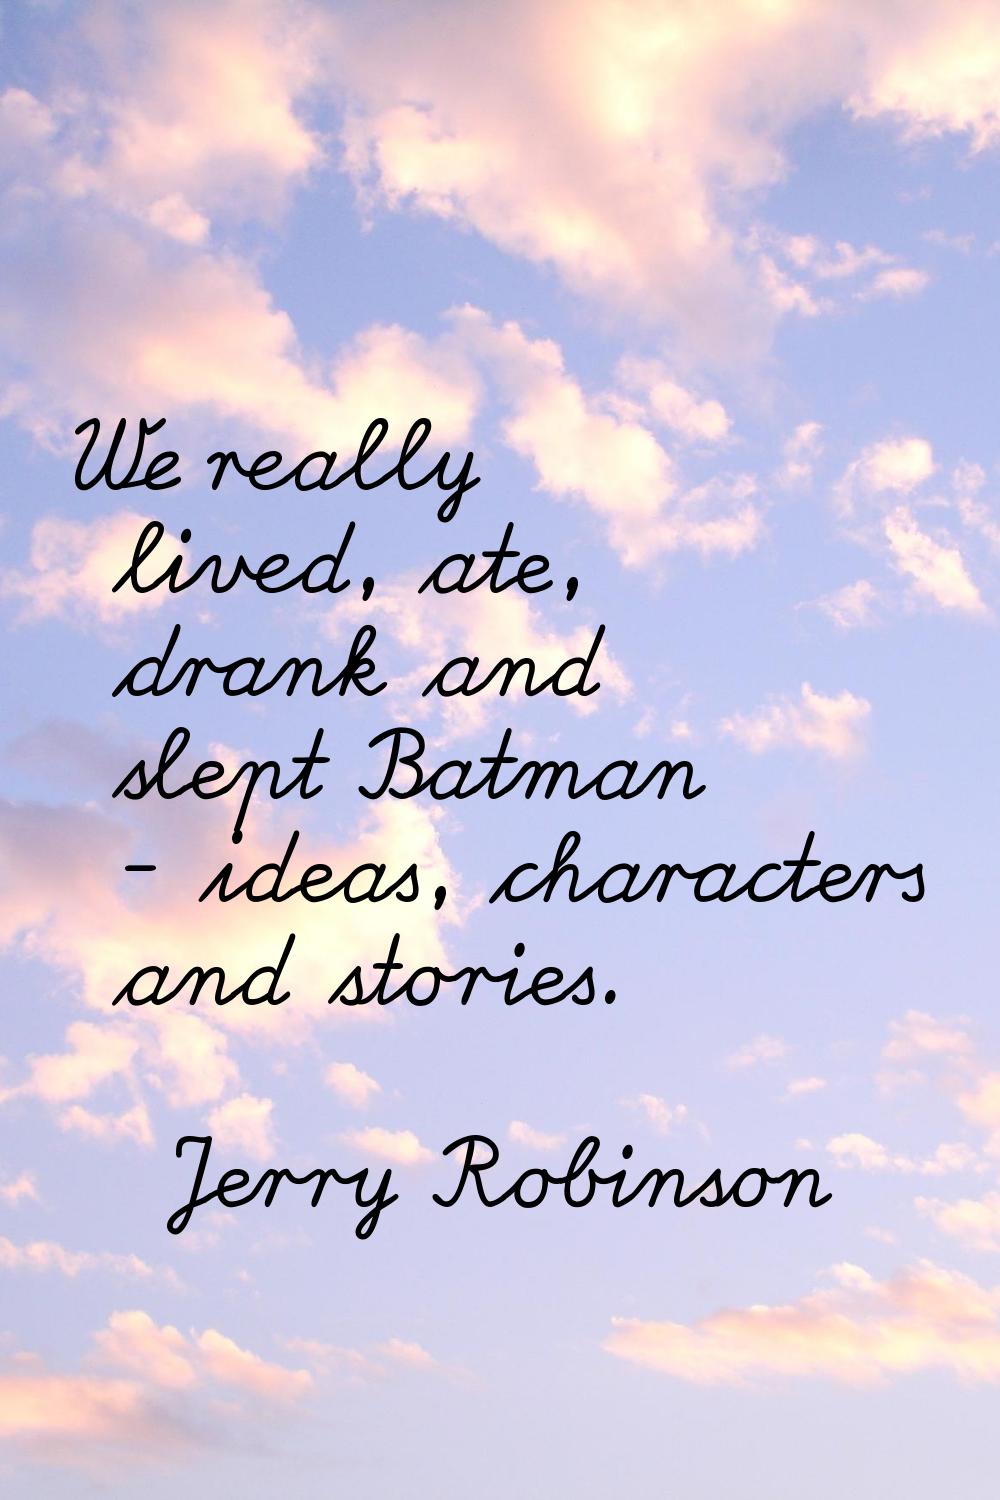 We really lived, ate, drank and slept Batman - ideas, characters and stories.